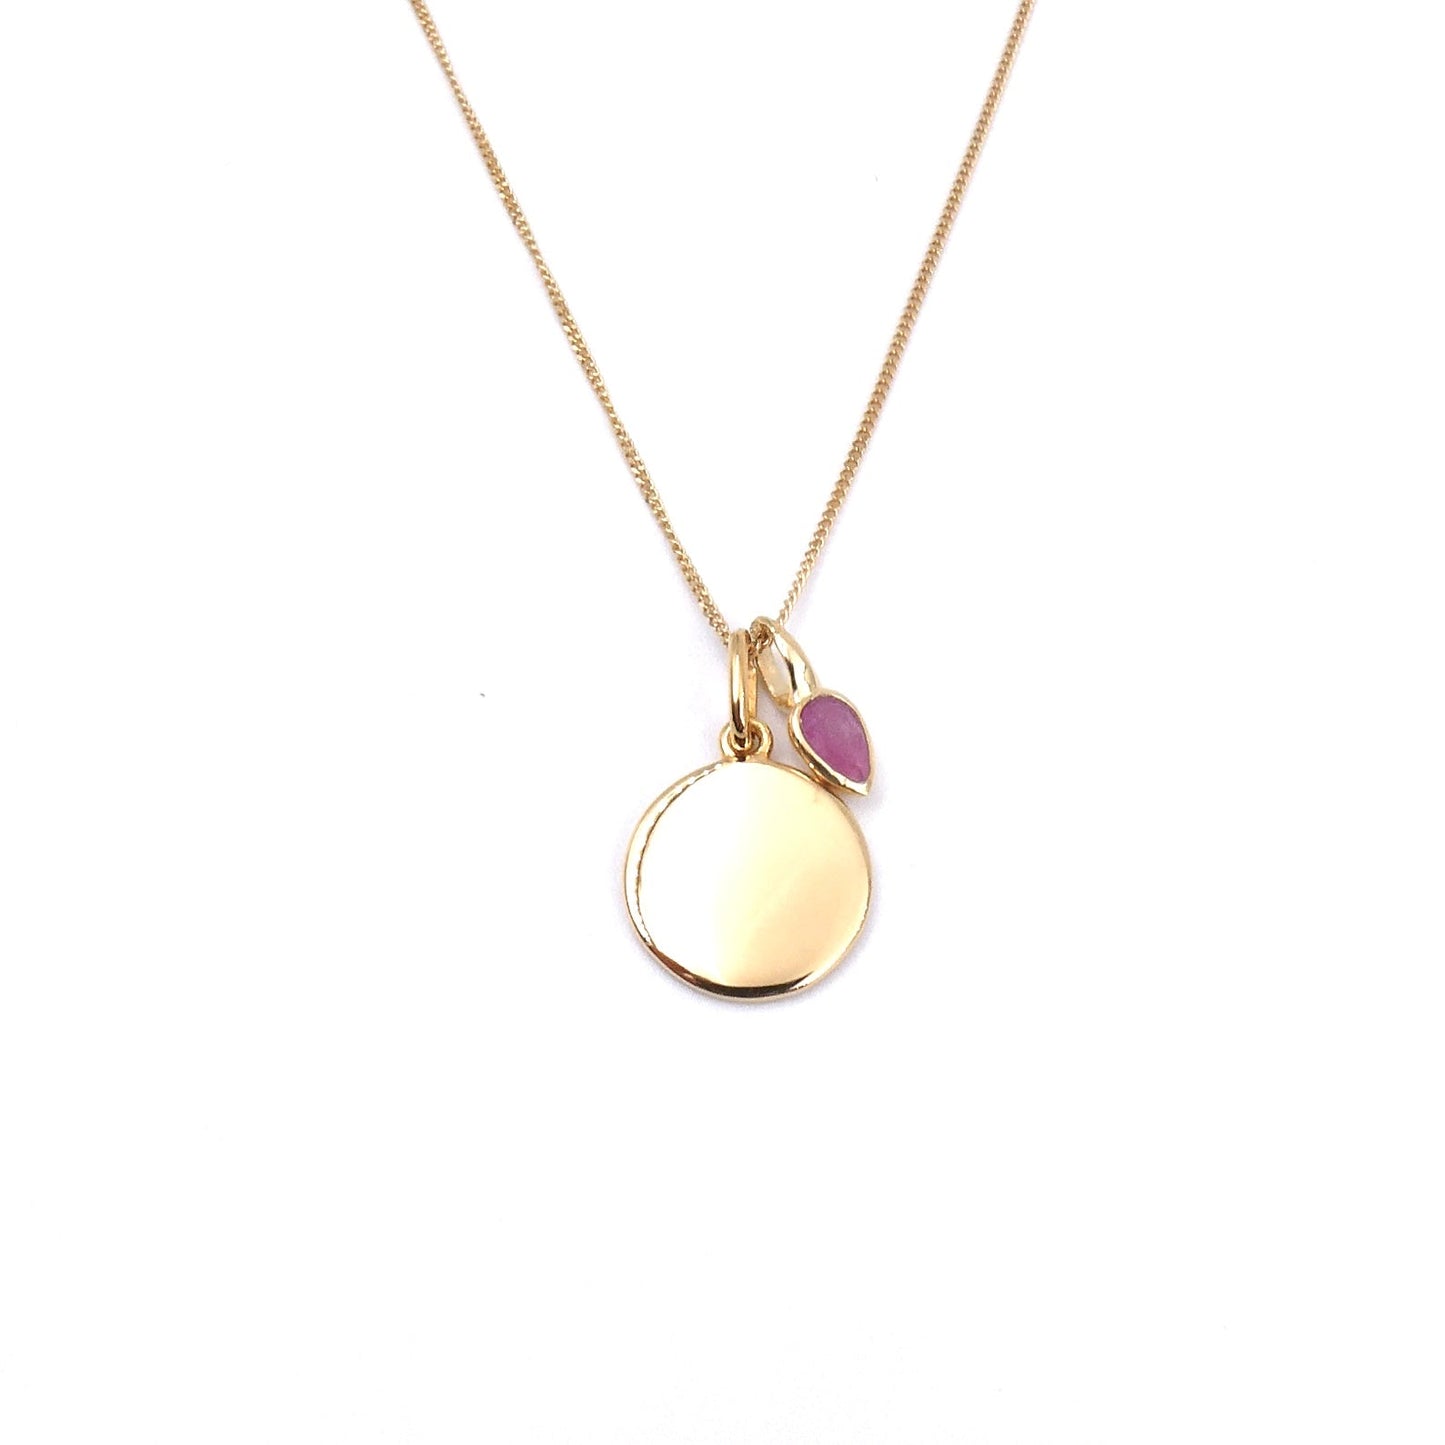 Gold plated pendant with a pink quartz drop on a fine chain, pink quartz for July. - Collected